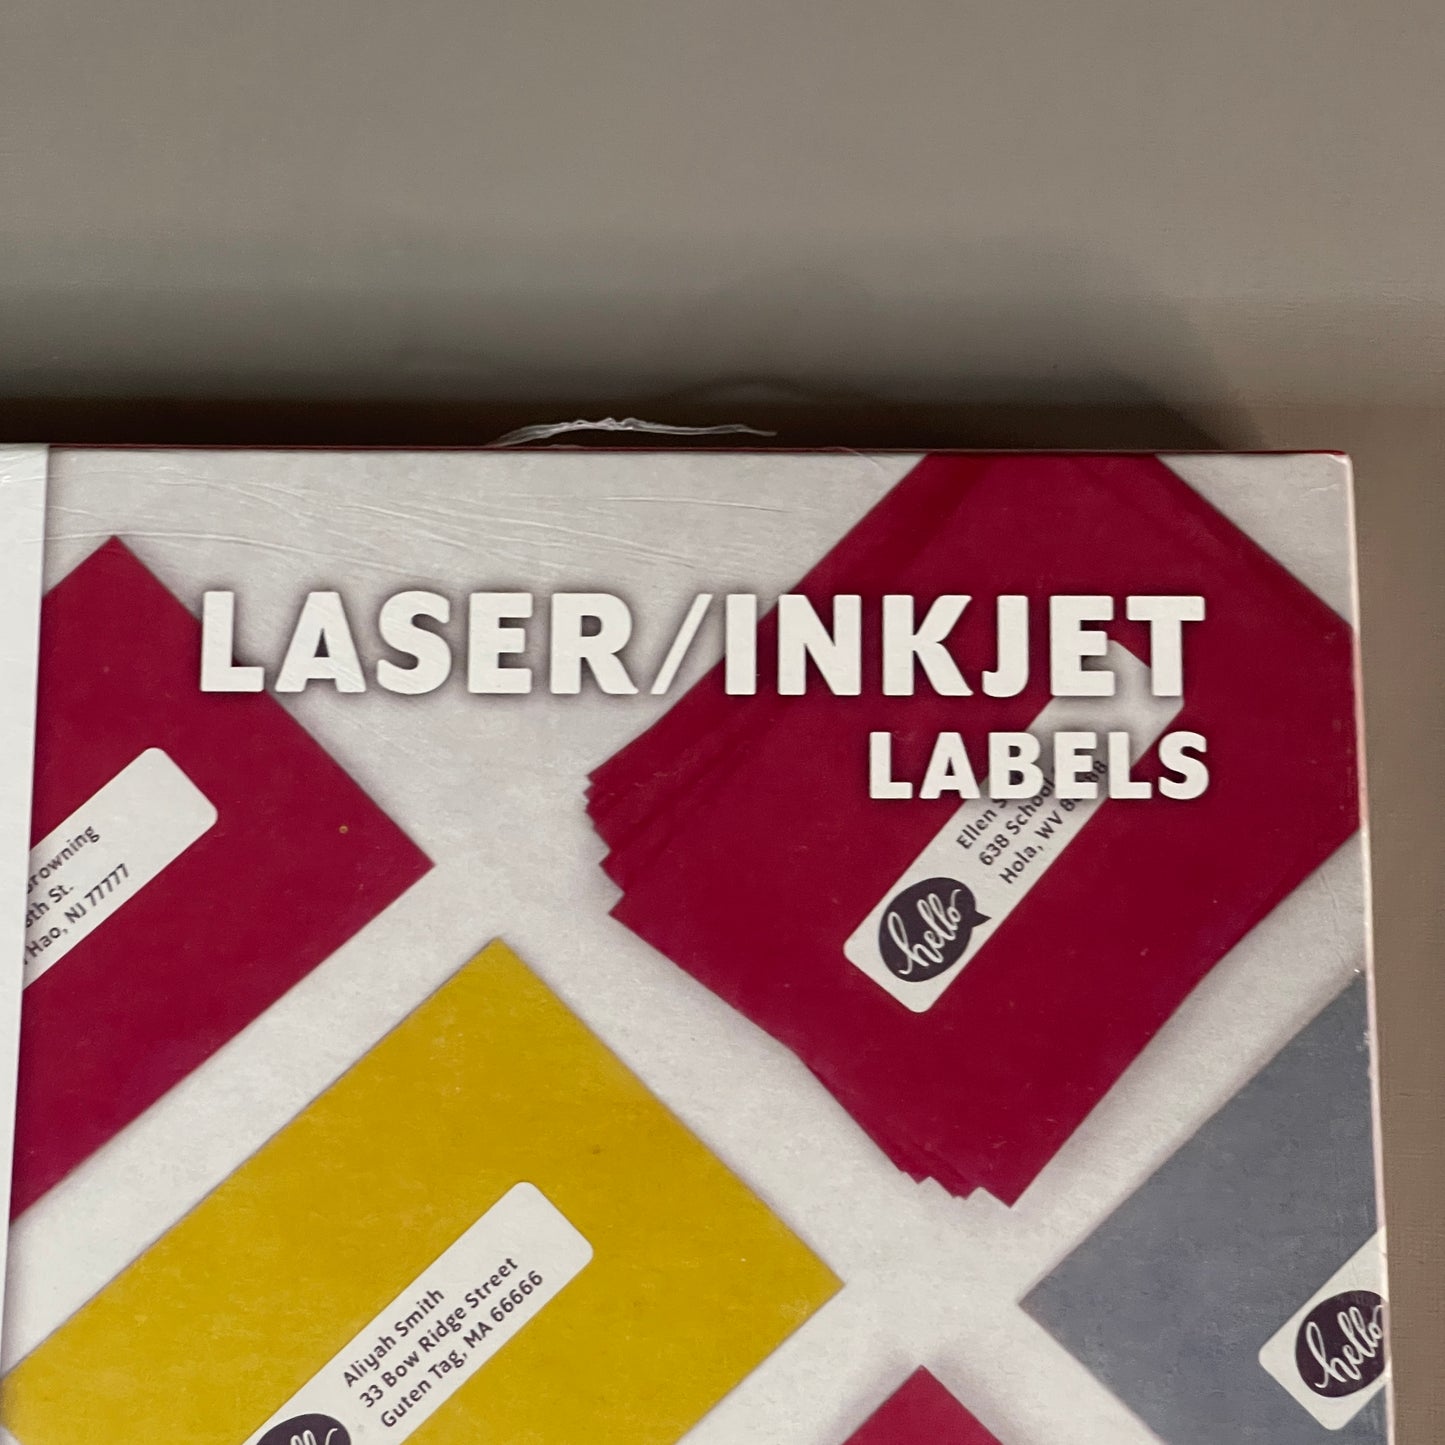 Z@ MACO Laser / Ink Jet White Shipping Labels 1" x 4” 2000 Labels (100 sheets) ML-2000